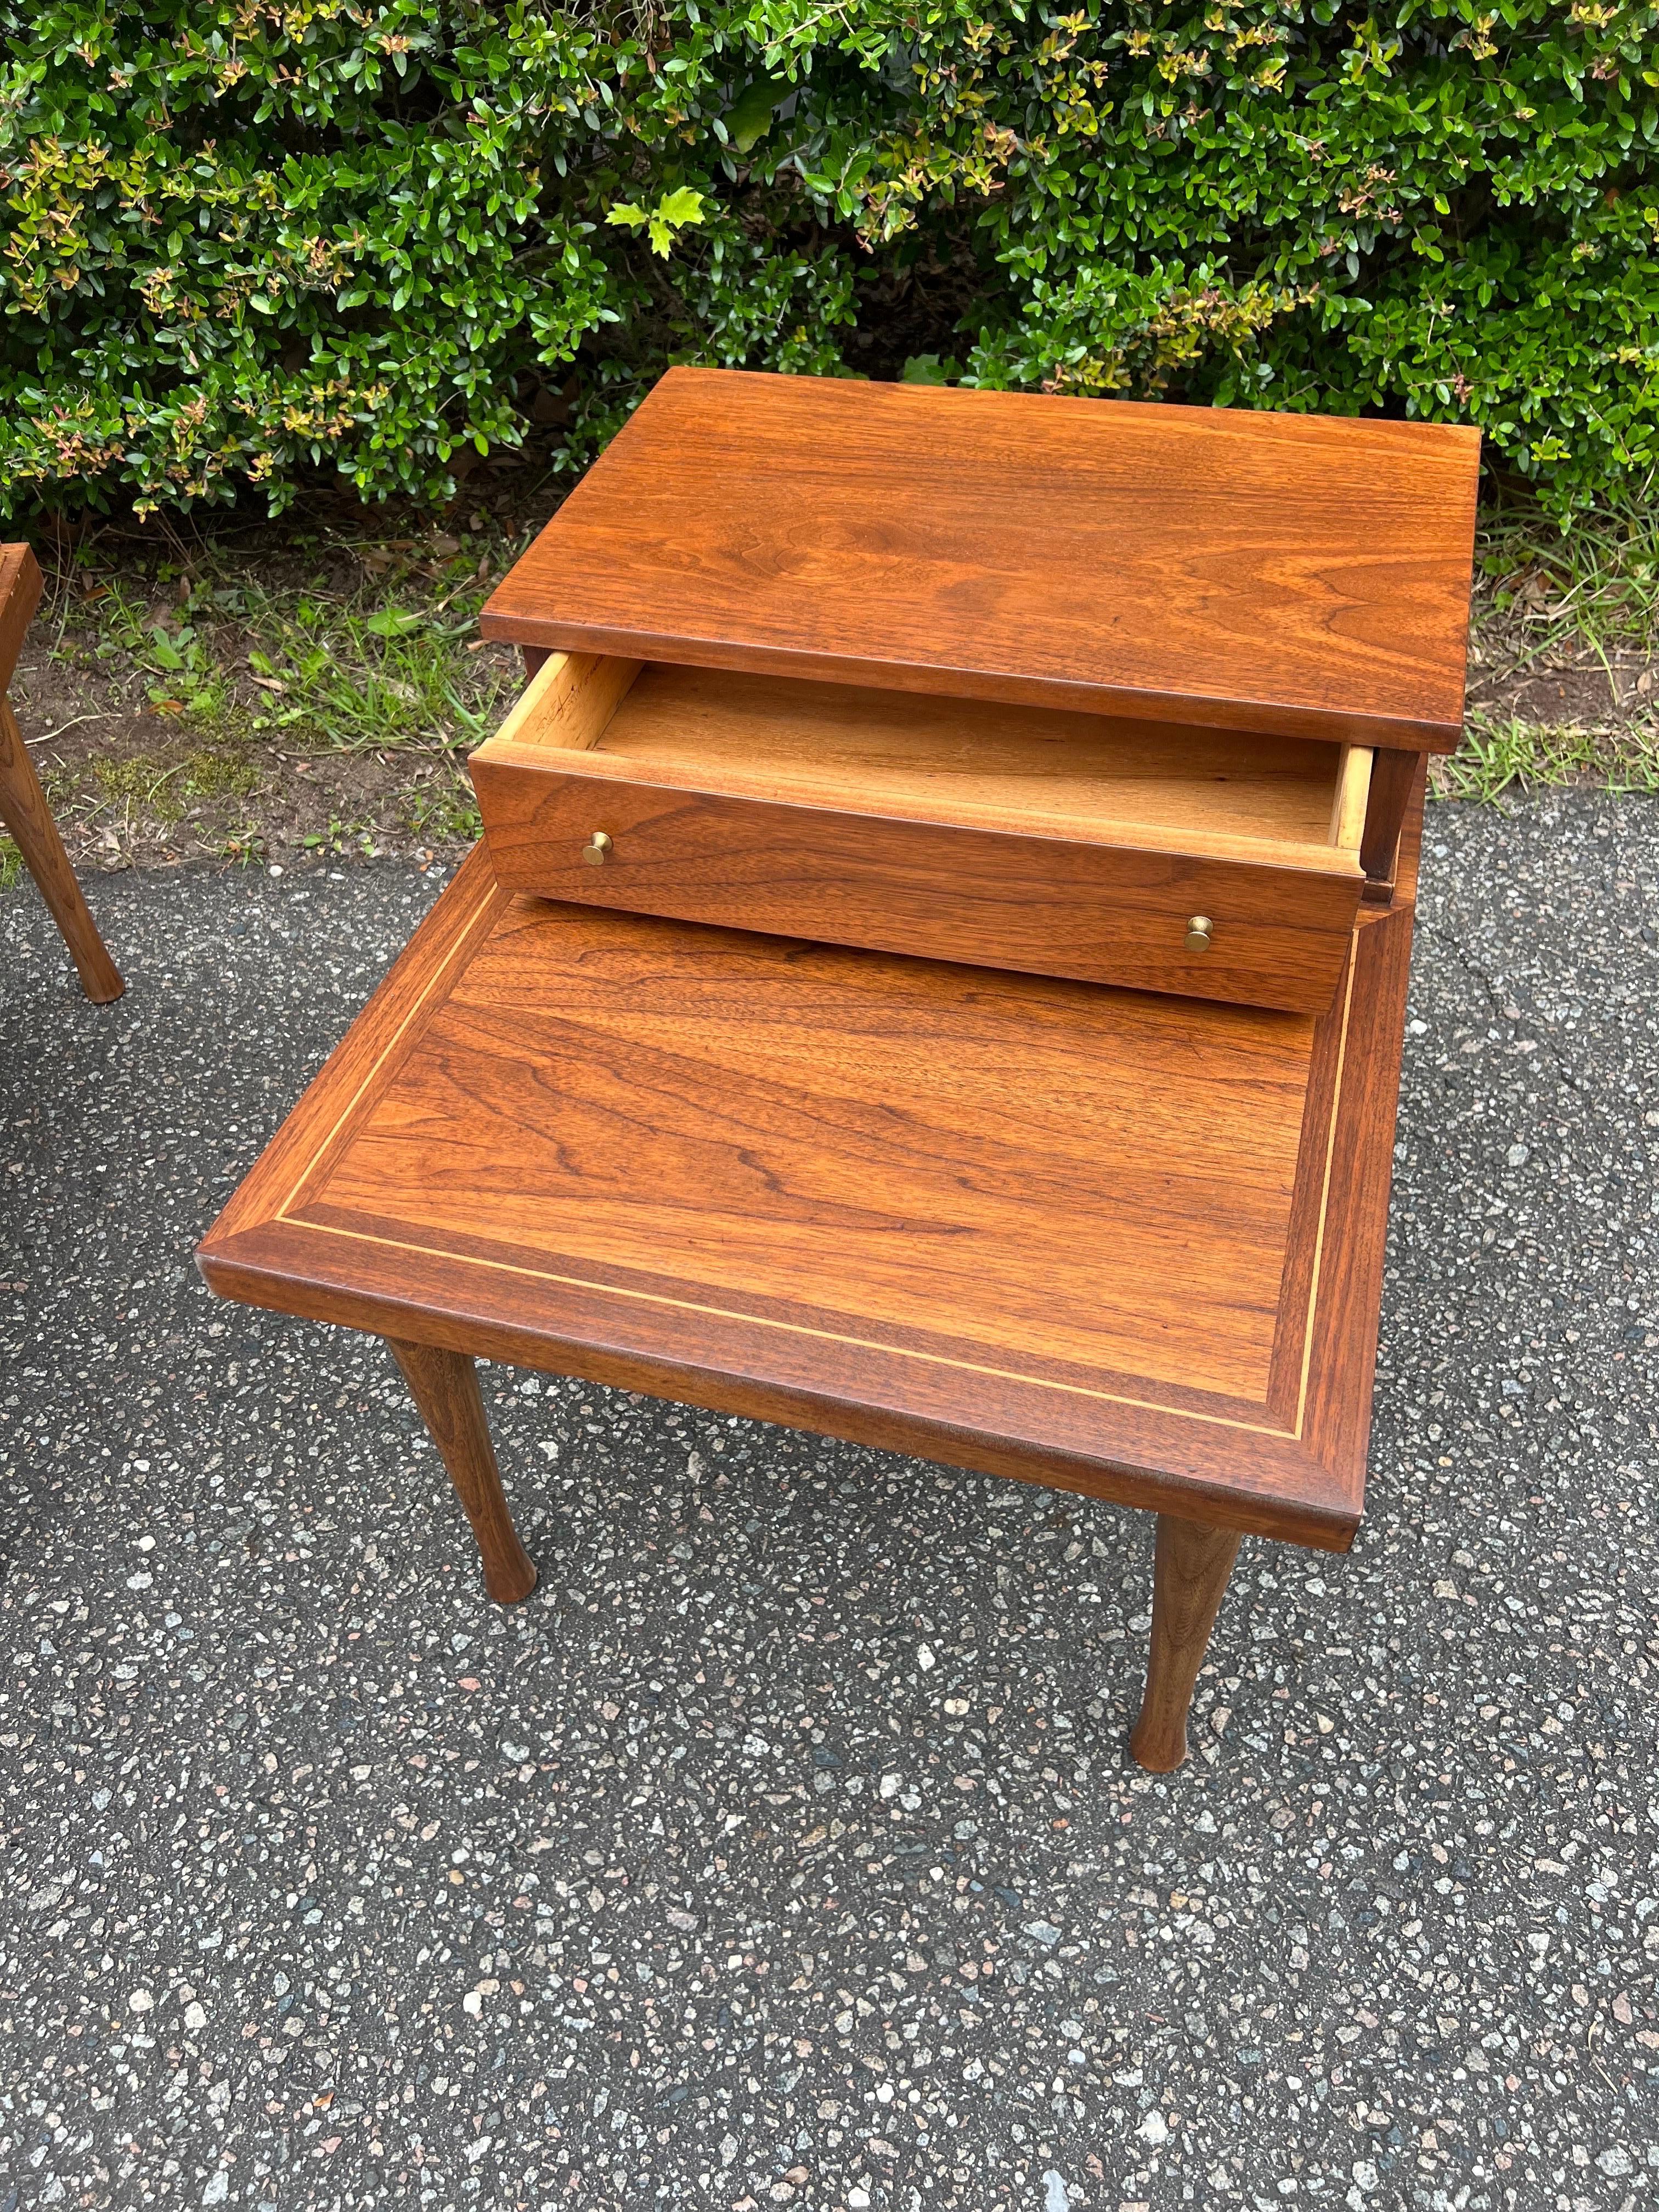 Pair of Mid-20th Century Modern American of Martinsville Side Tables For Sale 2